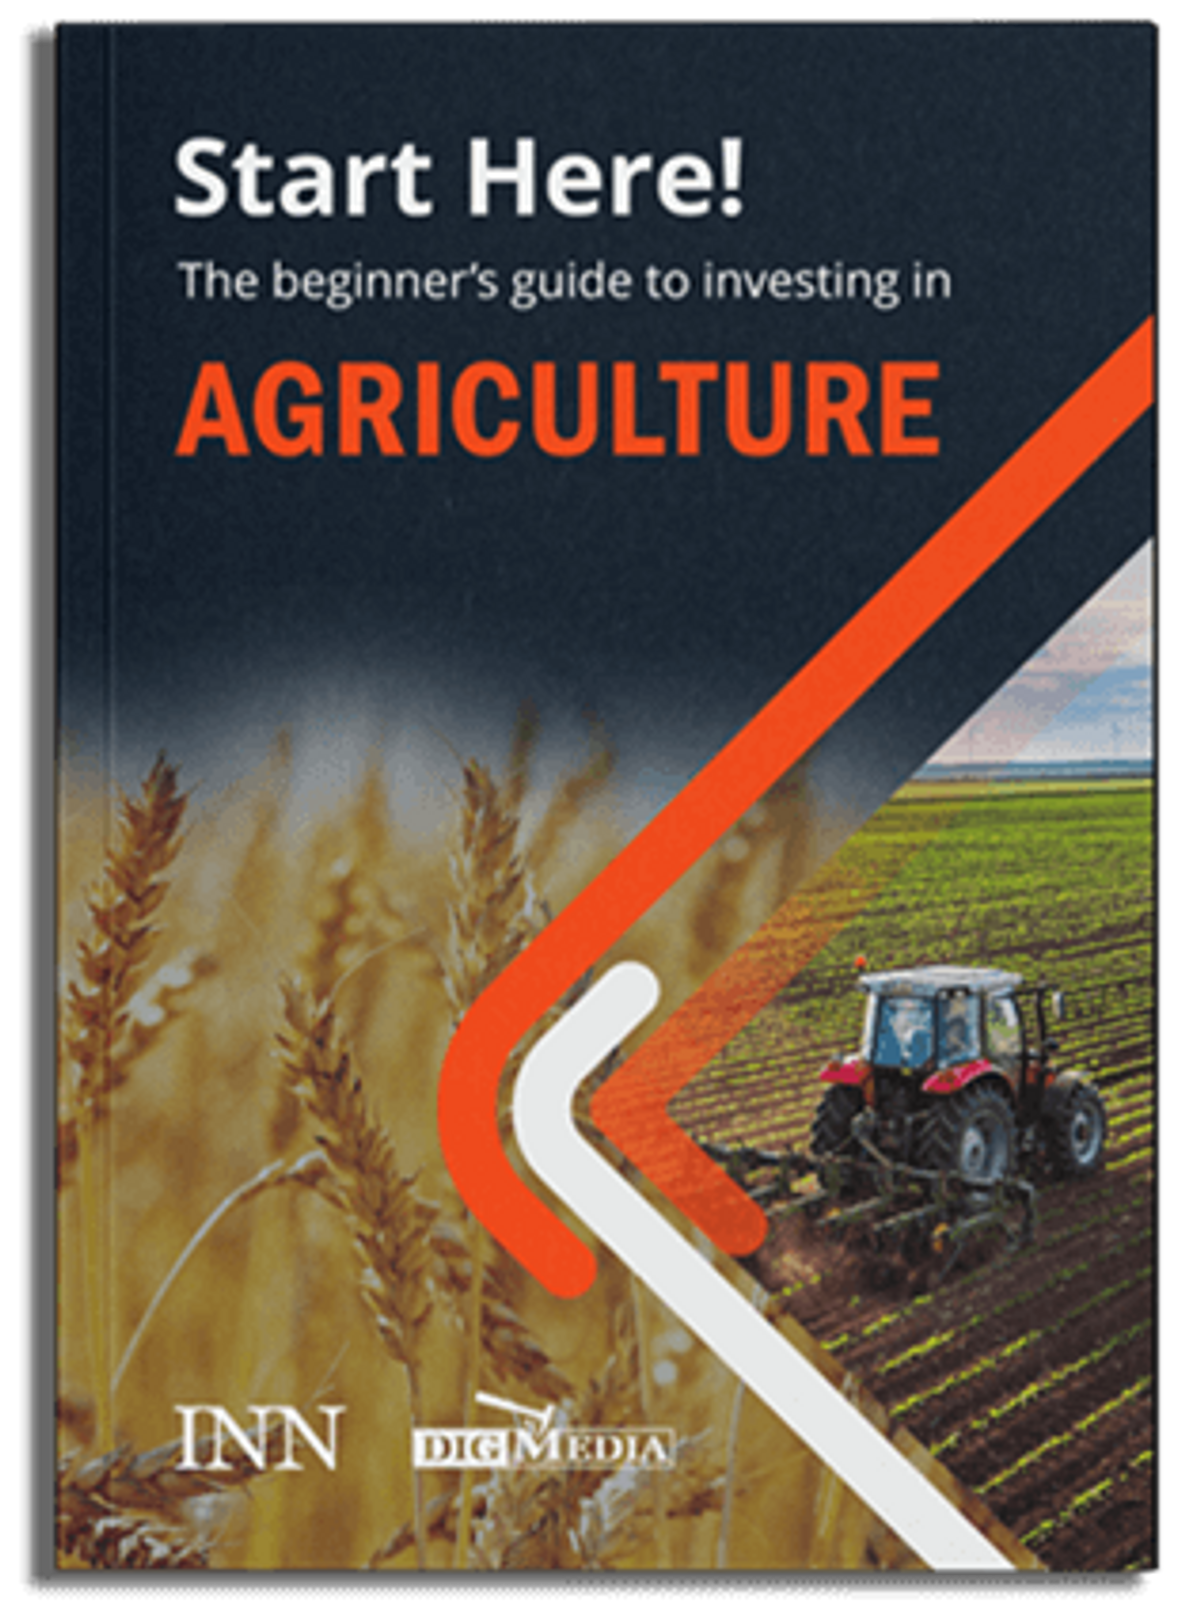  The Beginner's Guide to Investing In Agriculture